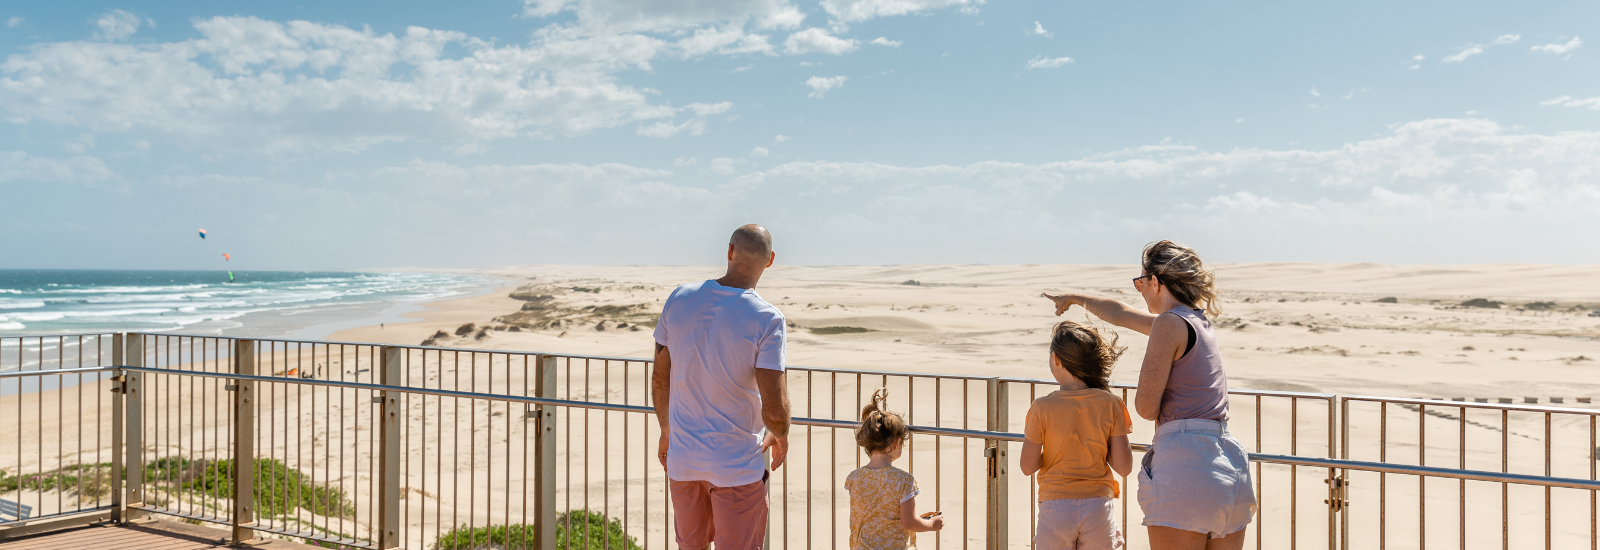 Family looking out from a bridge into the sea banner image